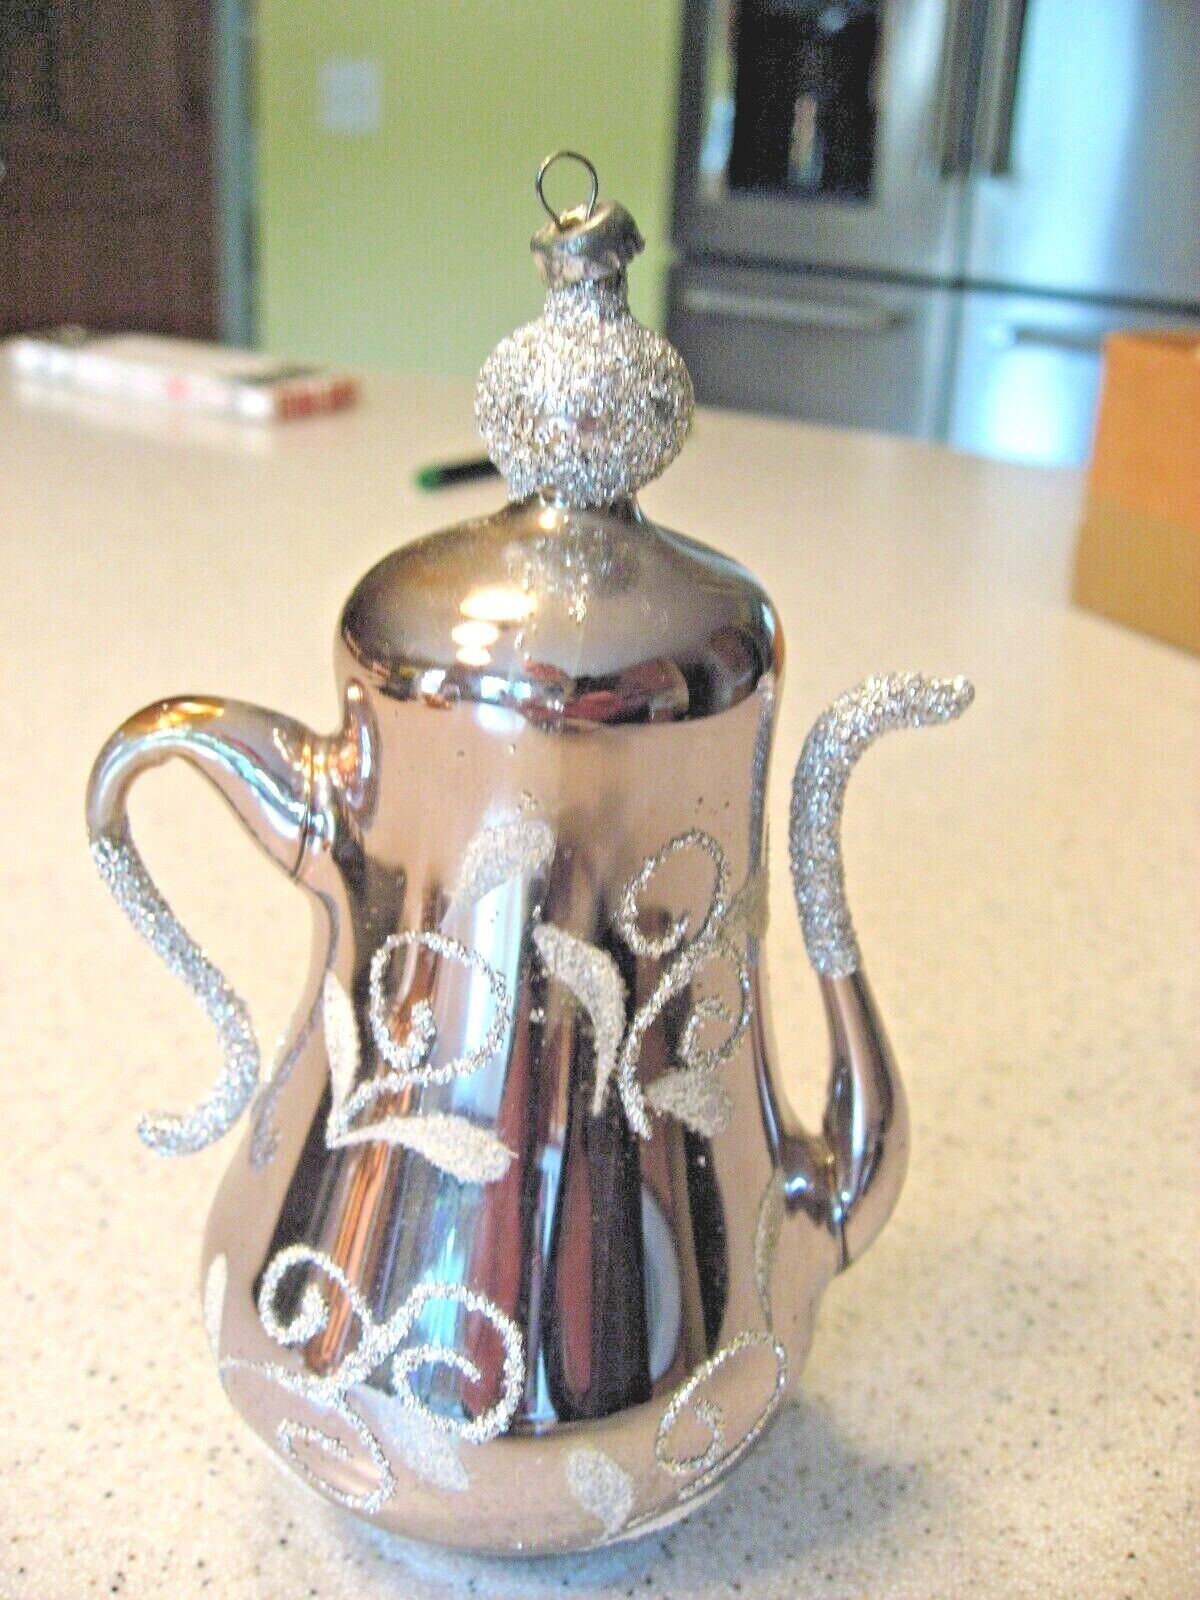 Vintage Silver Tea Coffee Pot with Silver Glitter Glass Christmas Ornament 5.5